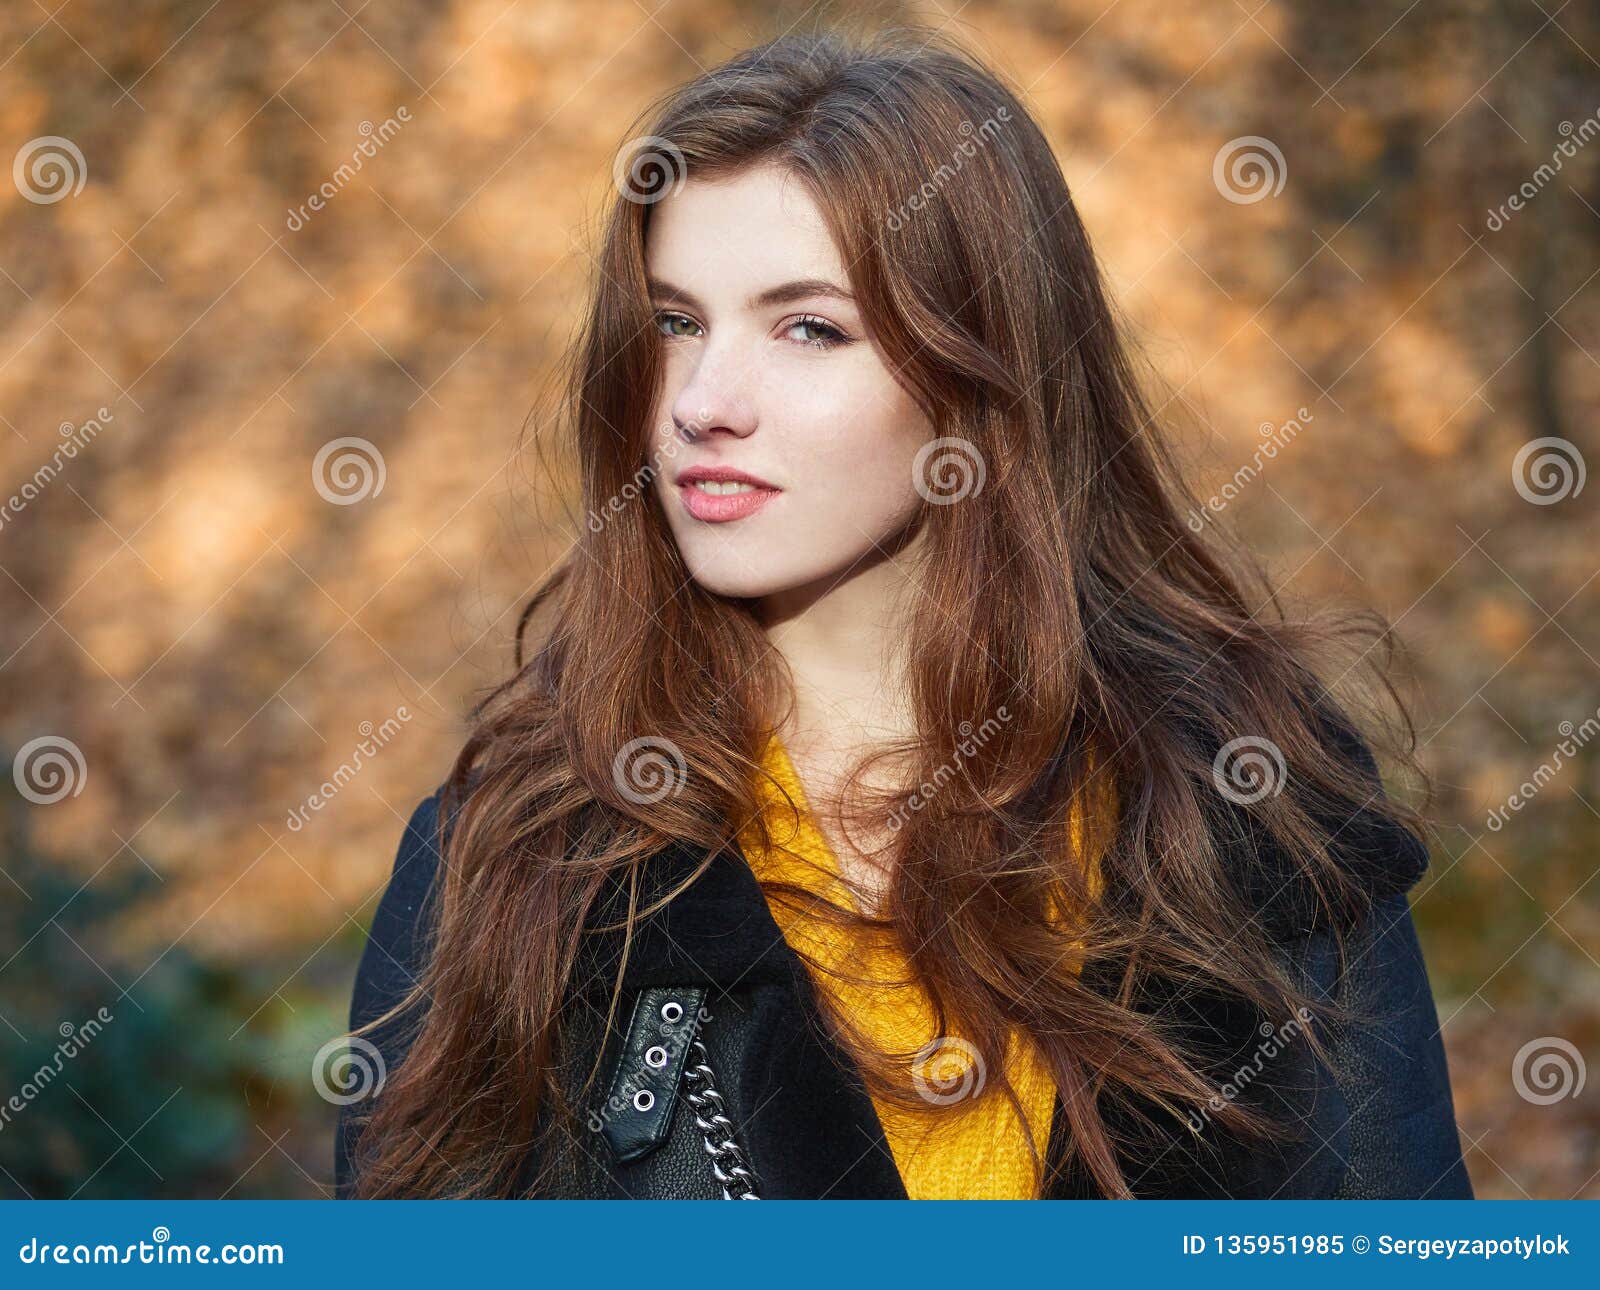 Fabulous Redhead Woman with Long Hair in Yellow Sweater Black Leather ...